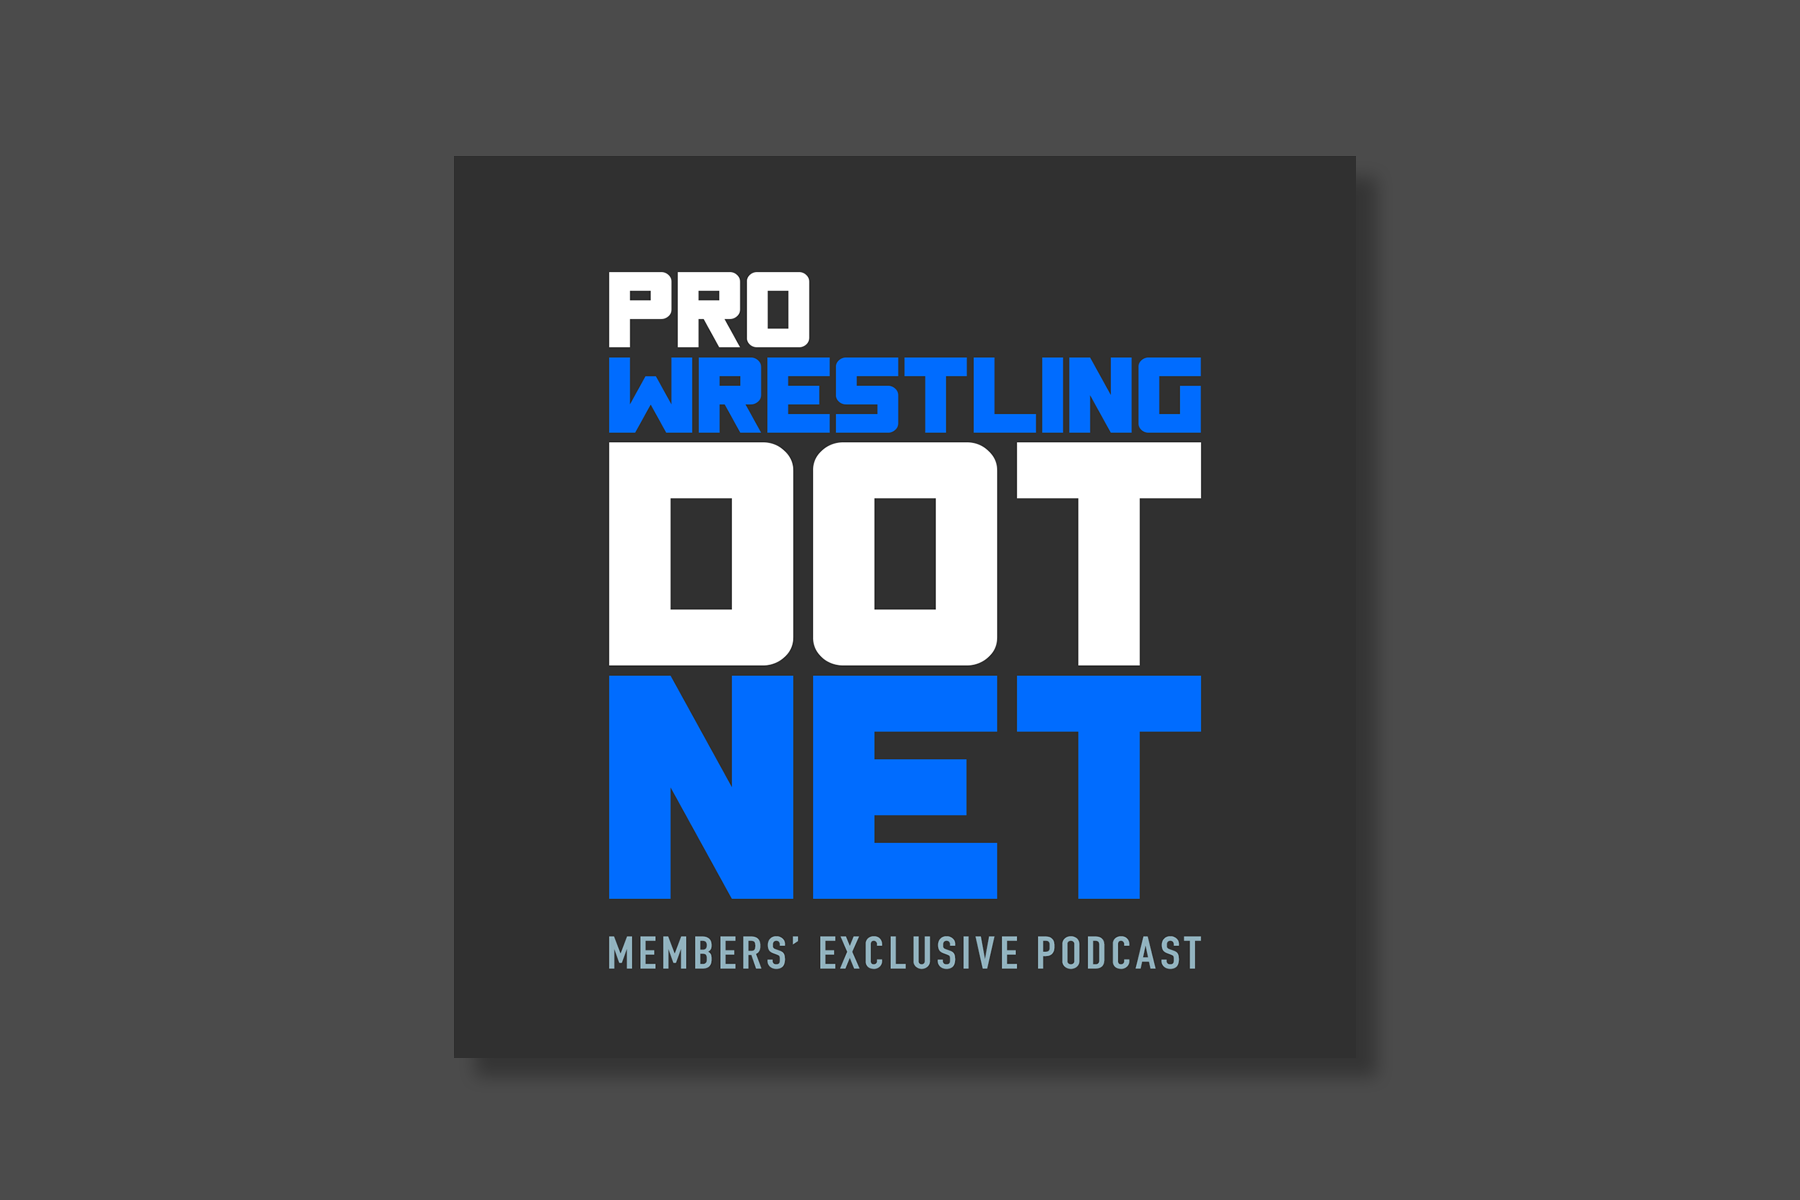 ProWrestling.net Membership SALE (ends soon) – Only 50 cents for pro wrestling’s biggest month of the summer (long-term membership savings also available)